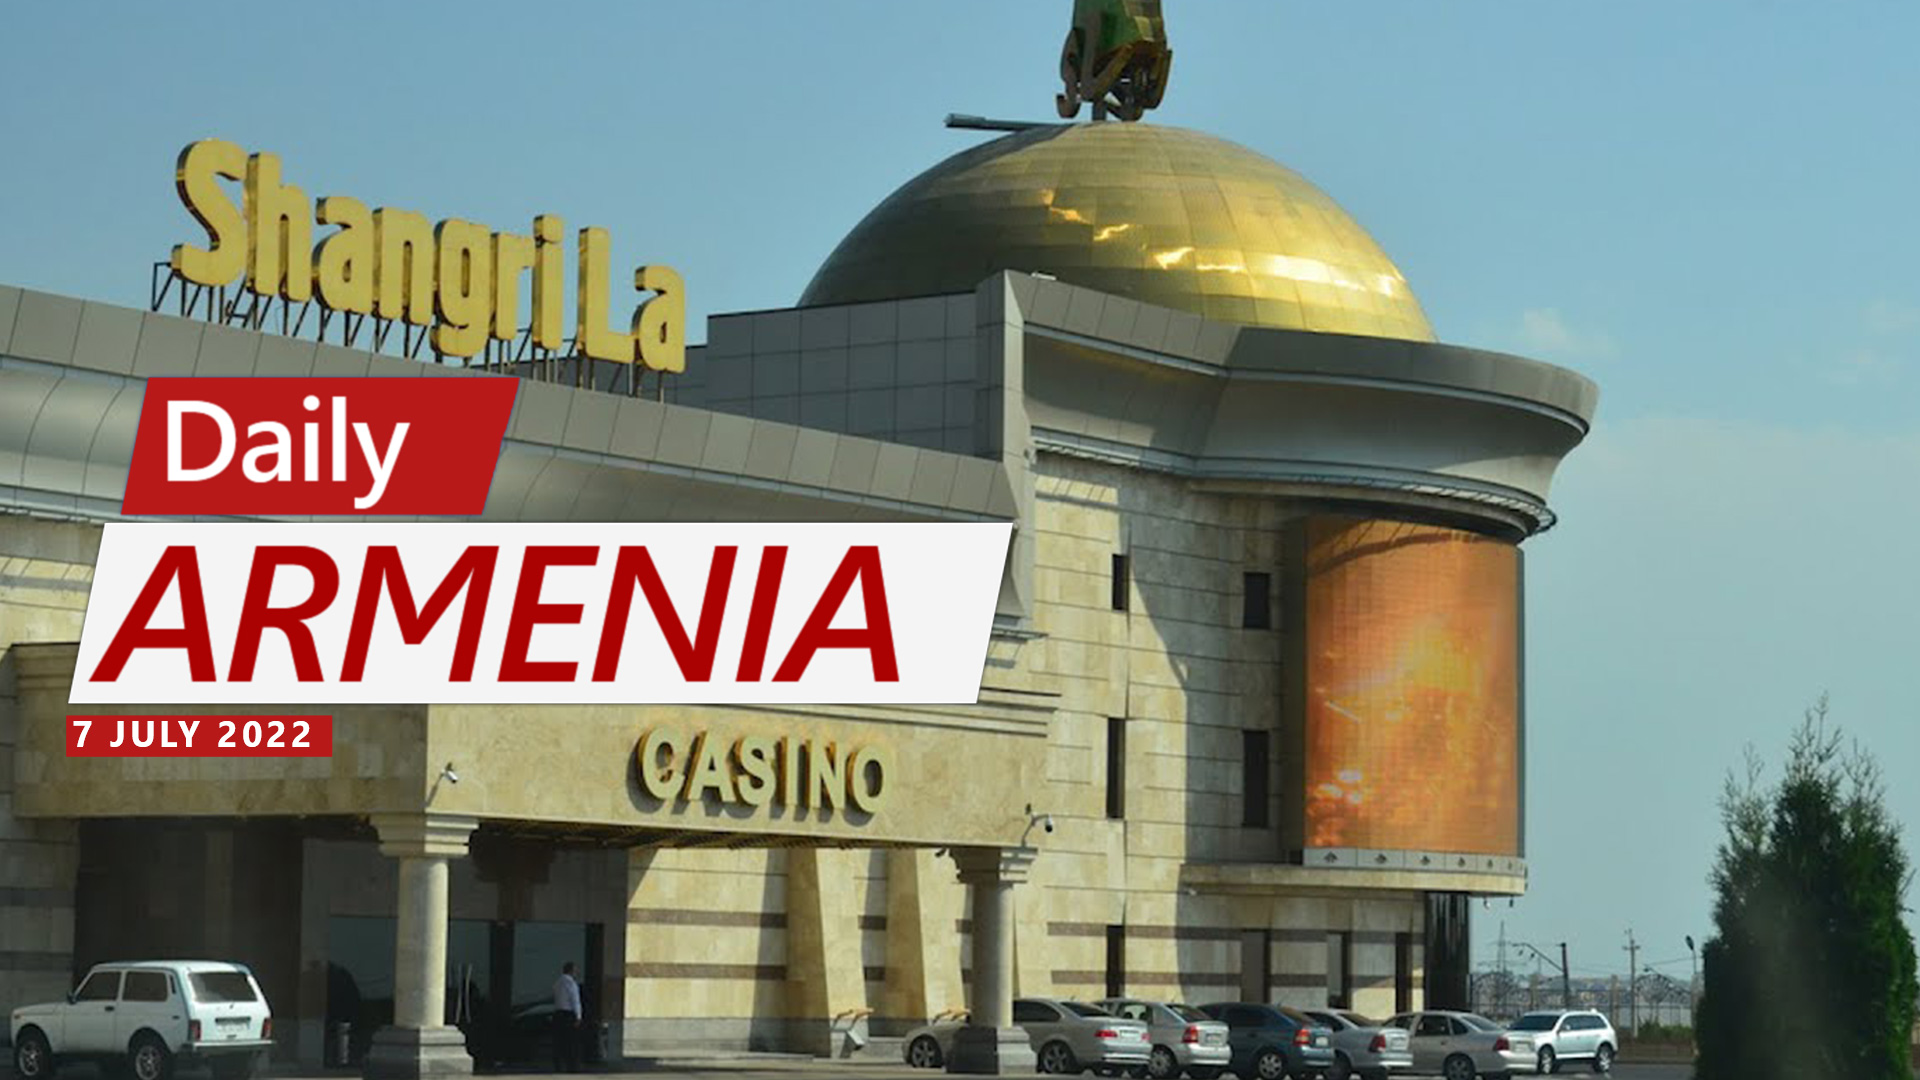 Business tycoon’s casino to get $10 million from Armenia’s state budget